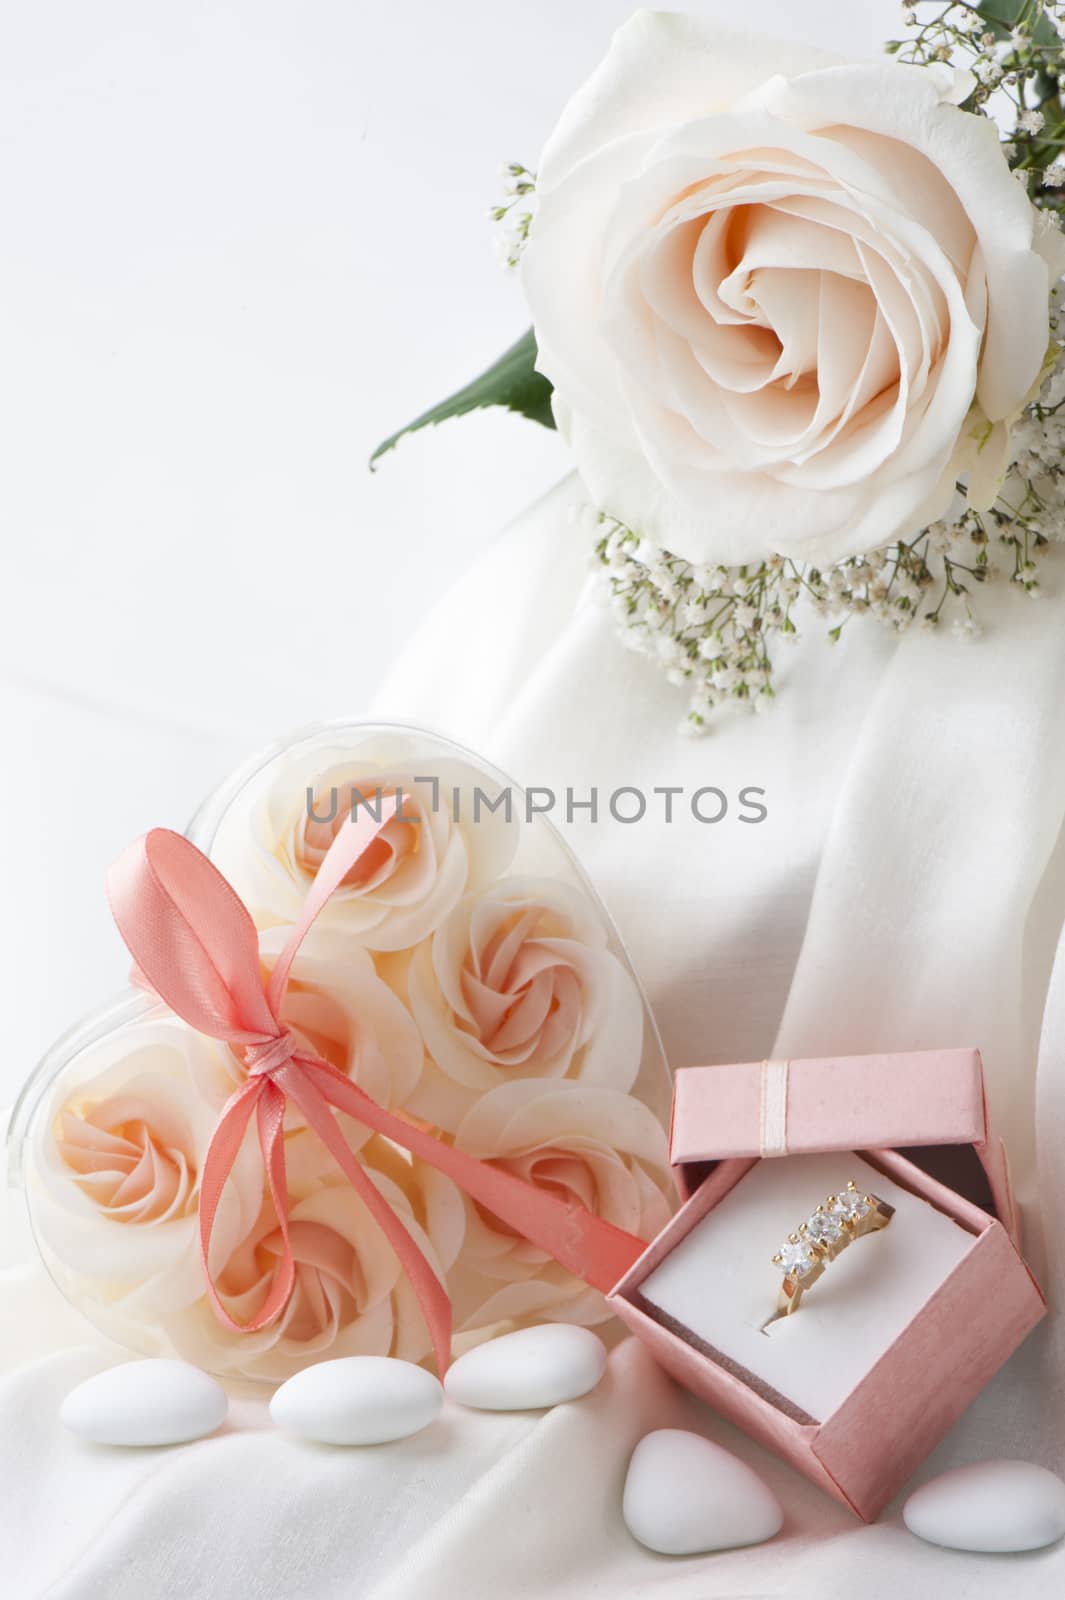 Wedding favors,wedding rings and flowers on white background